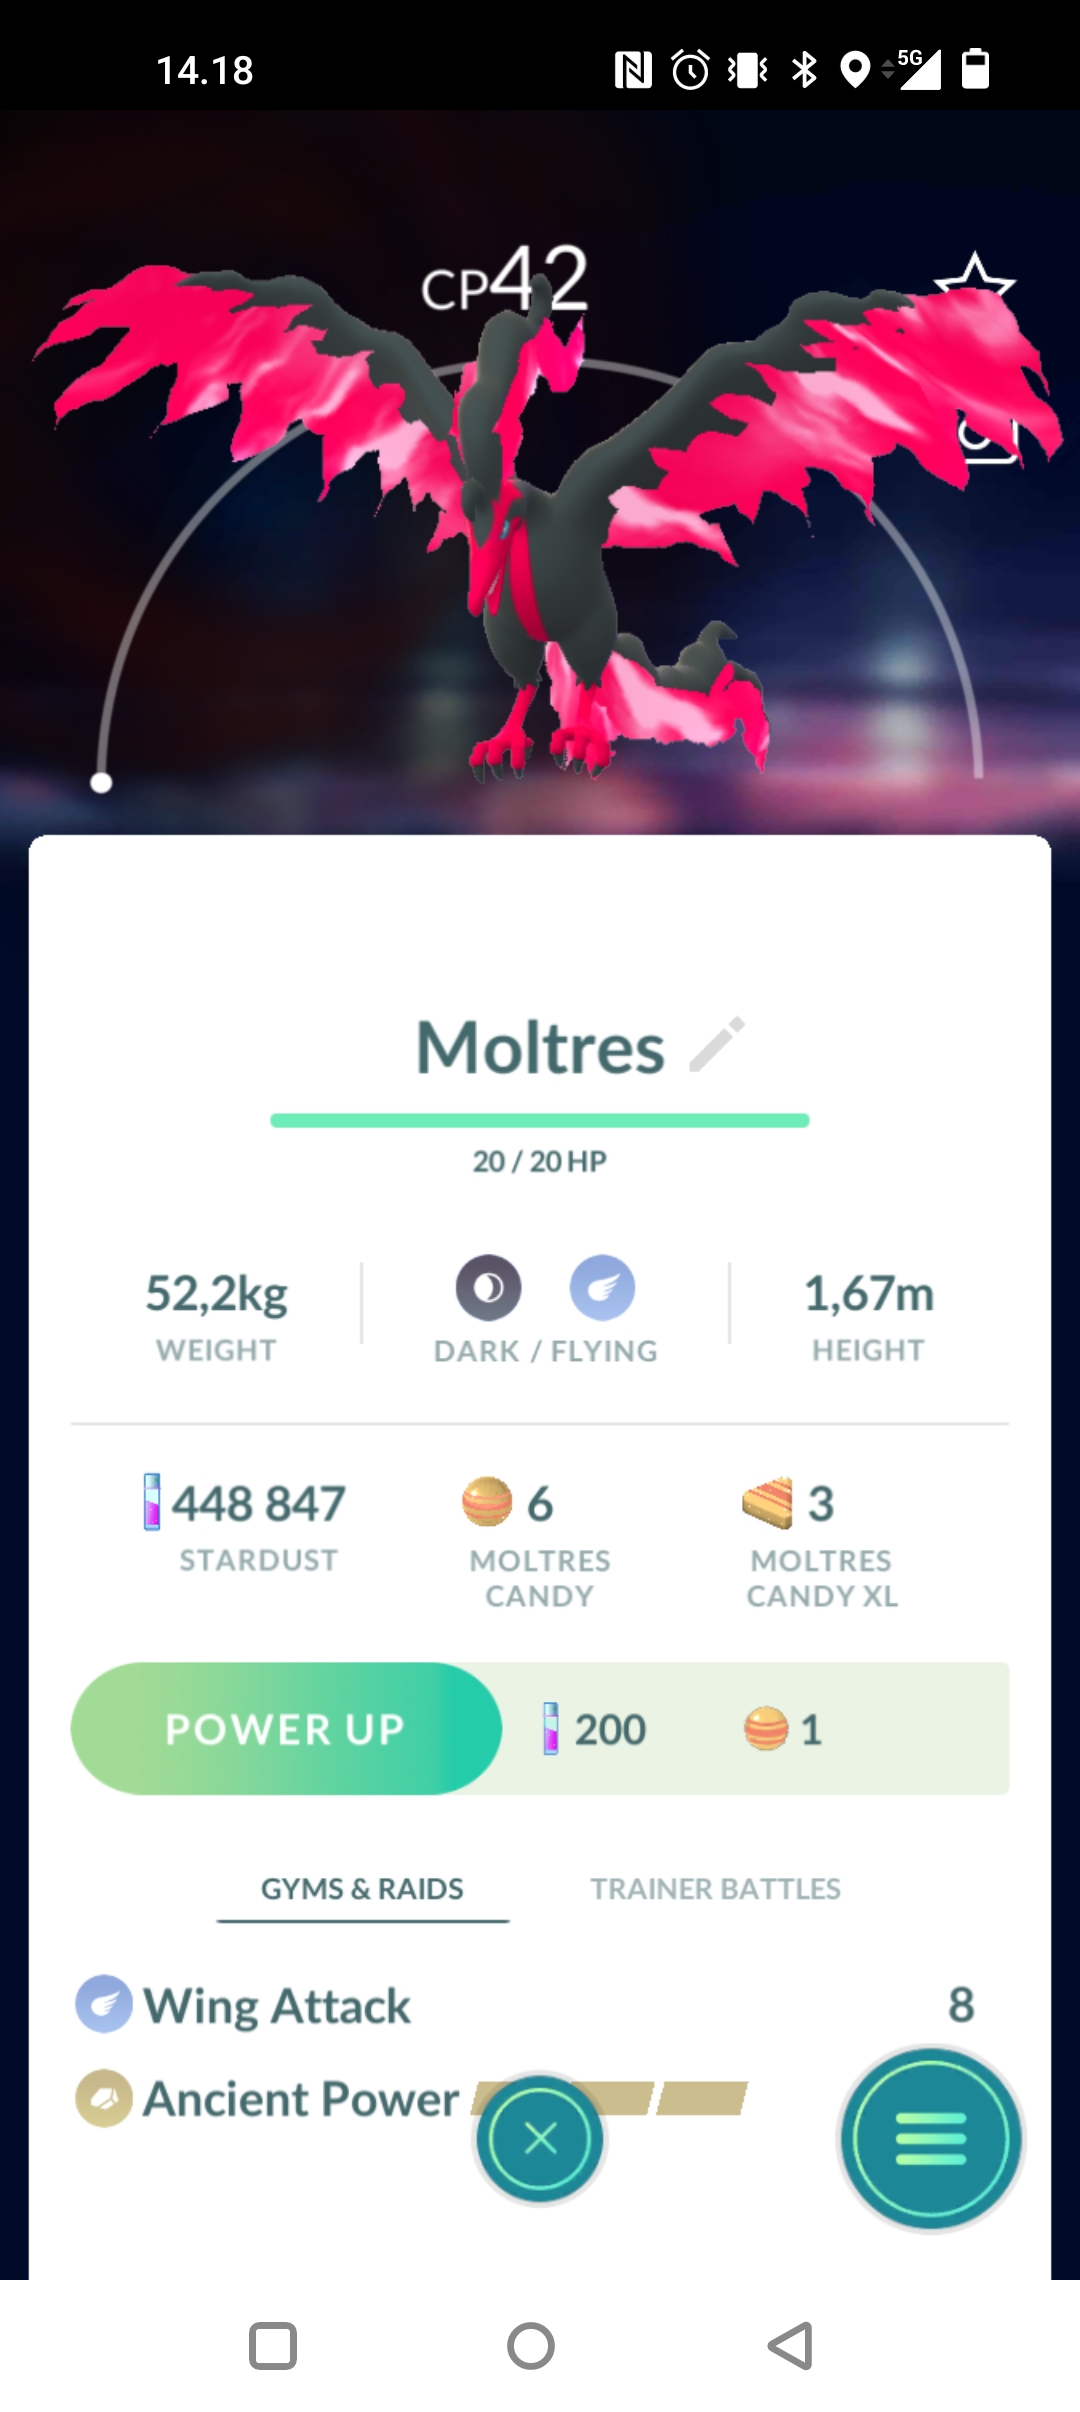 Is a level one galarian moltres actually a flex despite the low cp